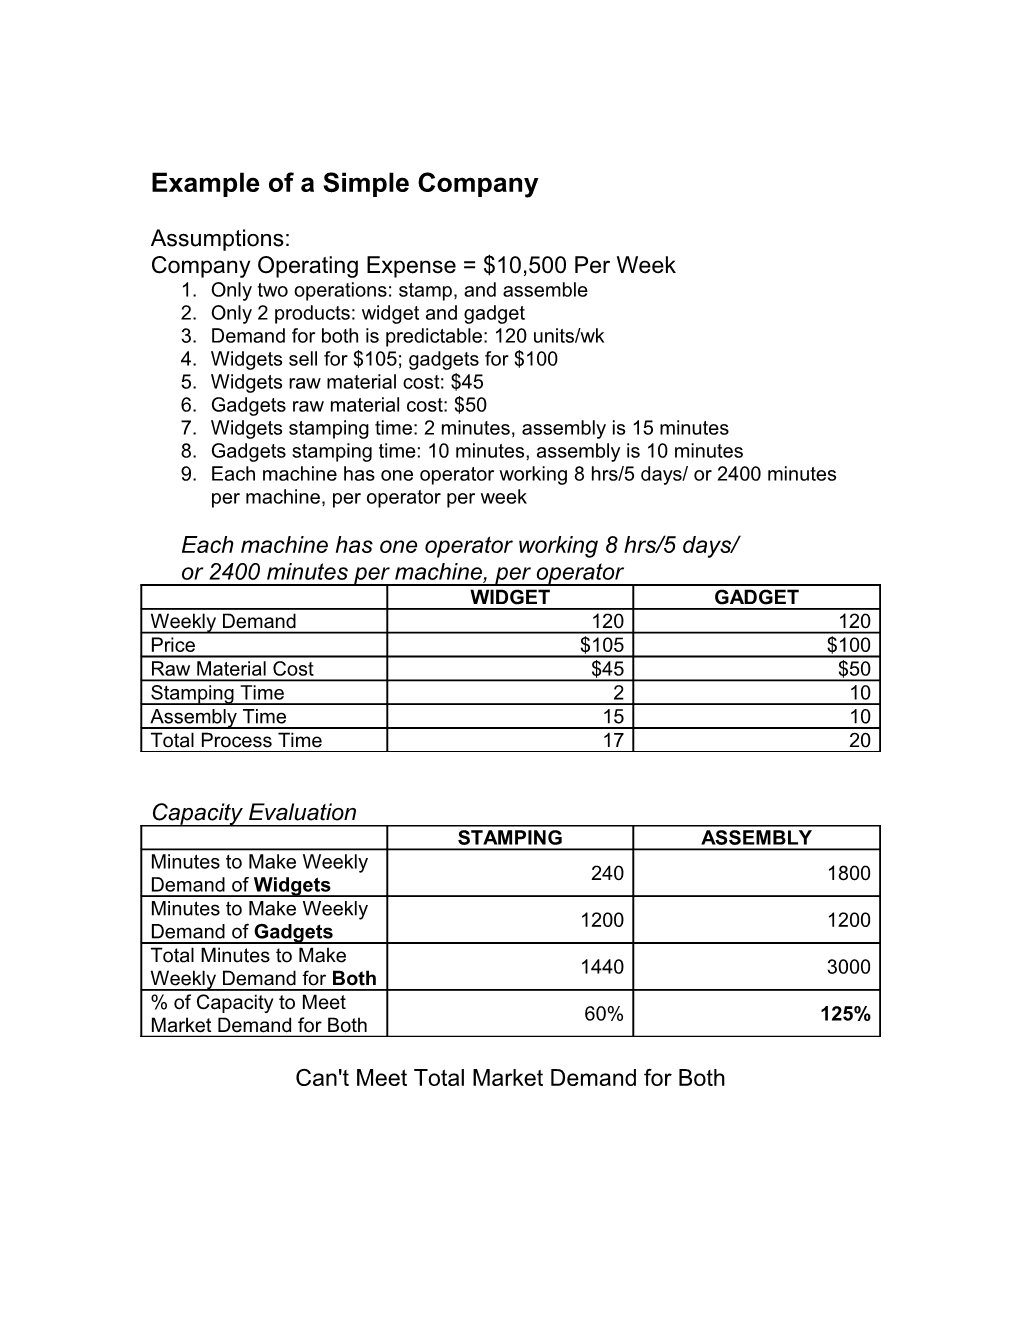 Example of a Simple Company